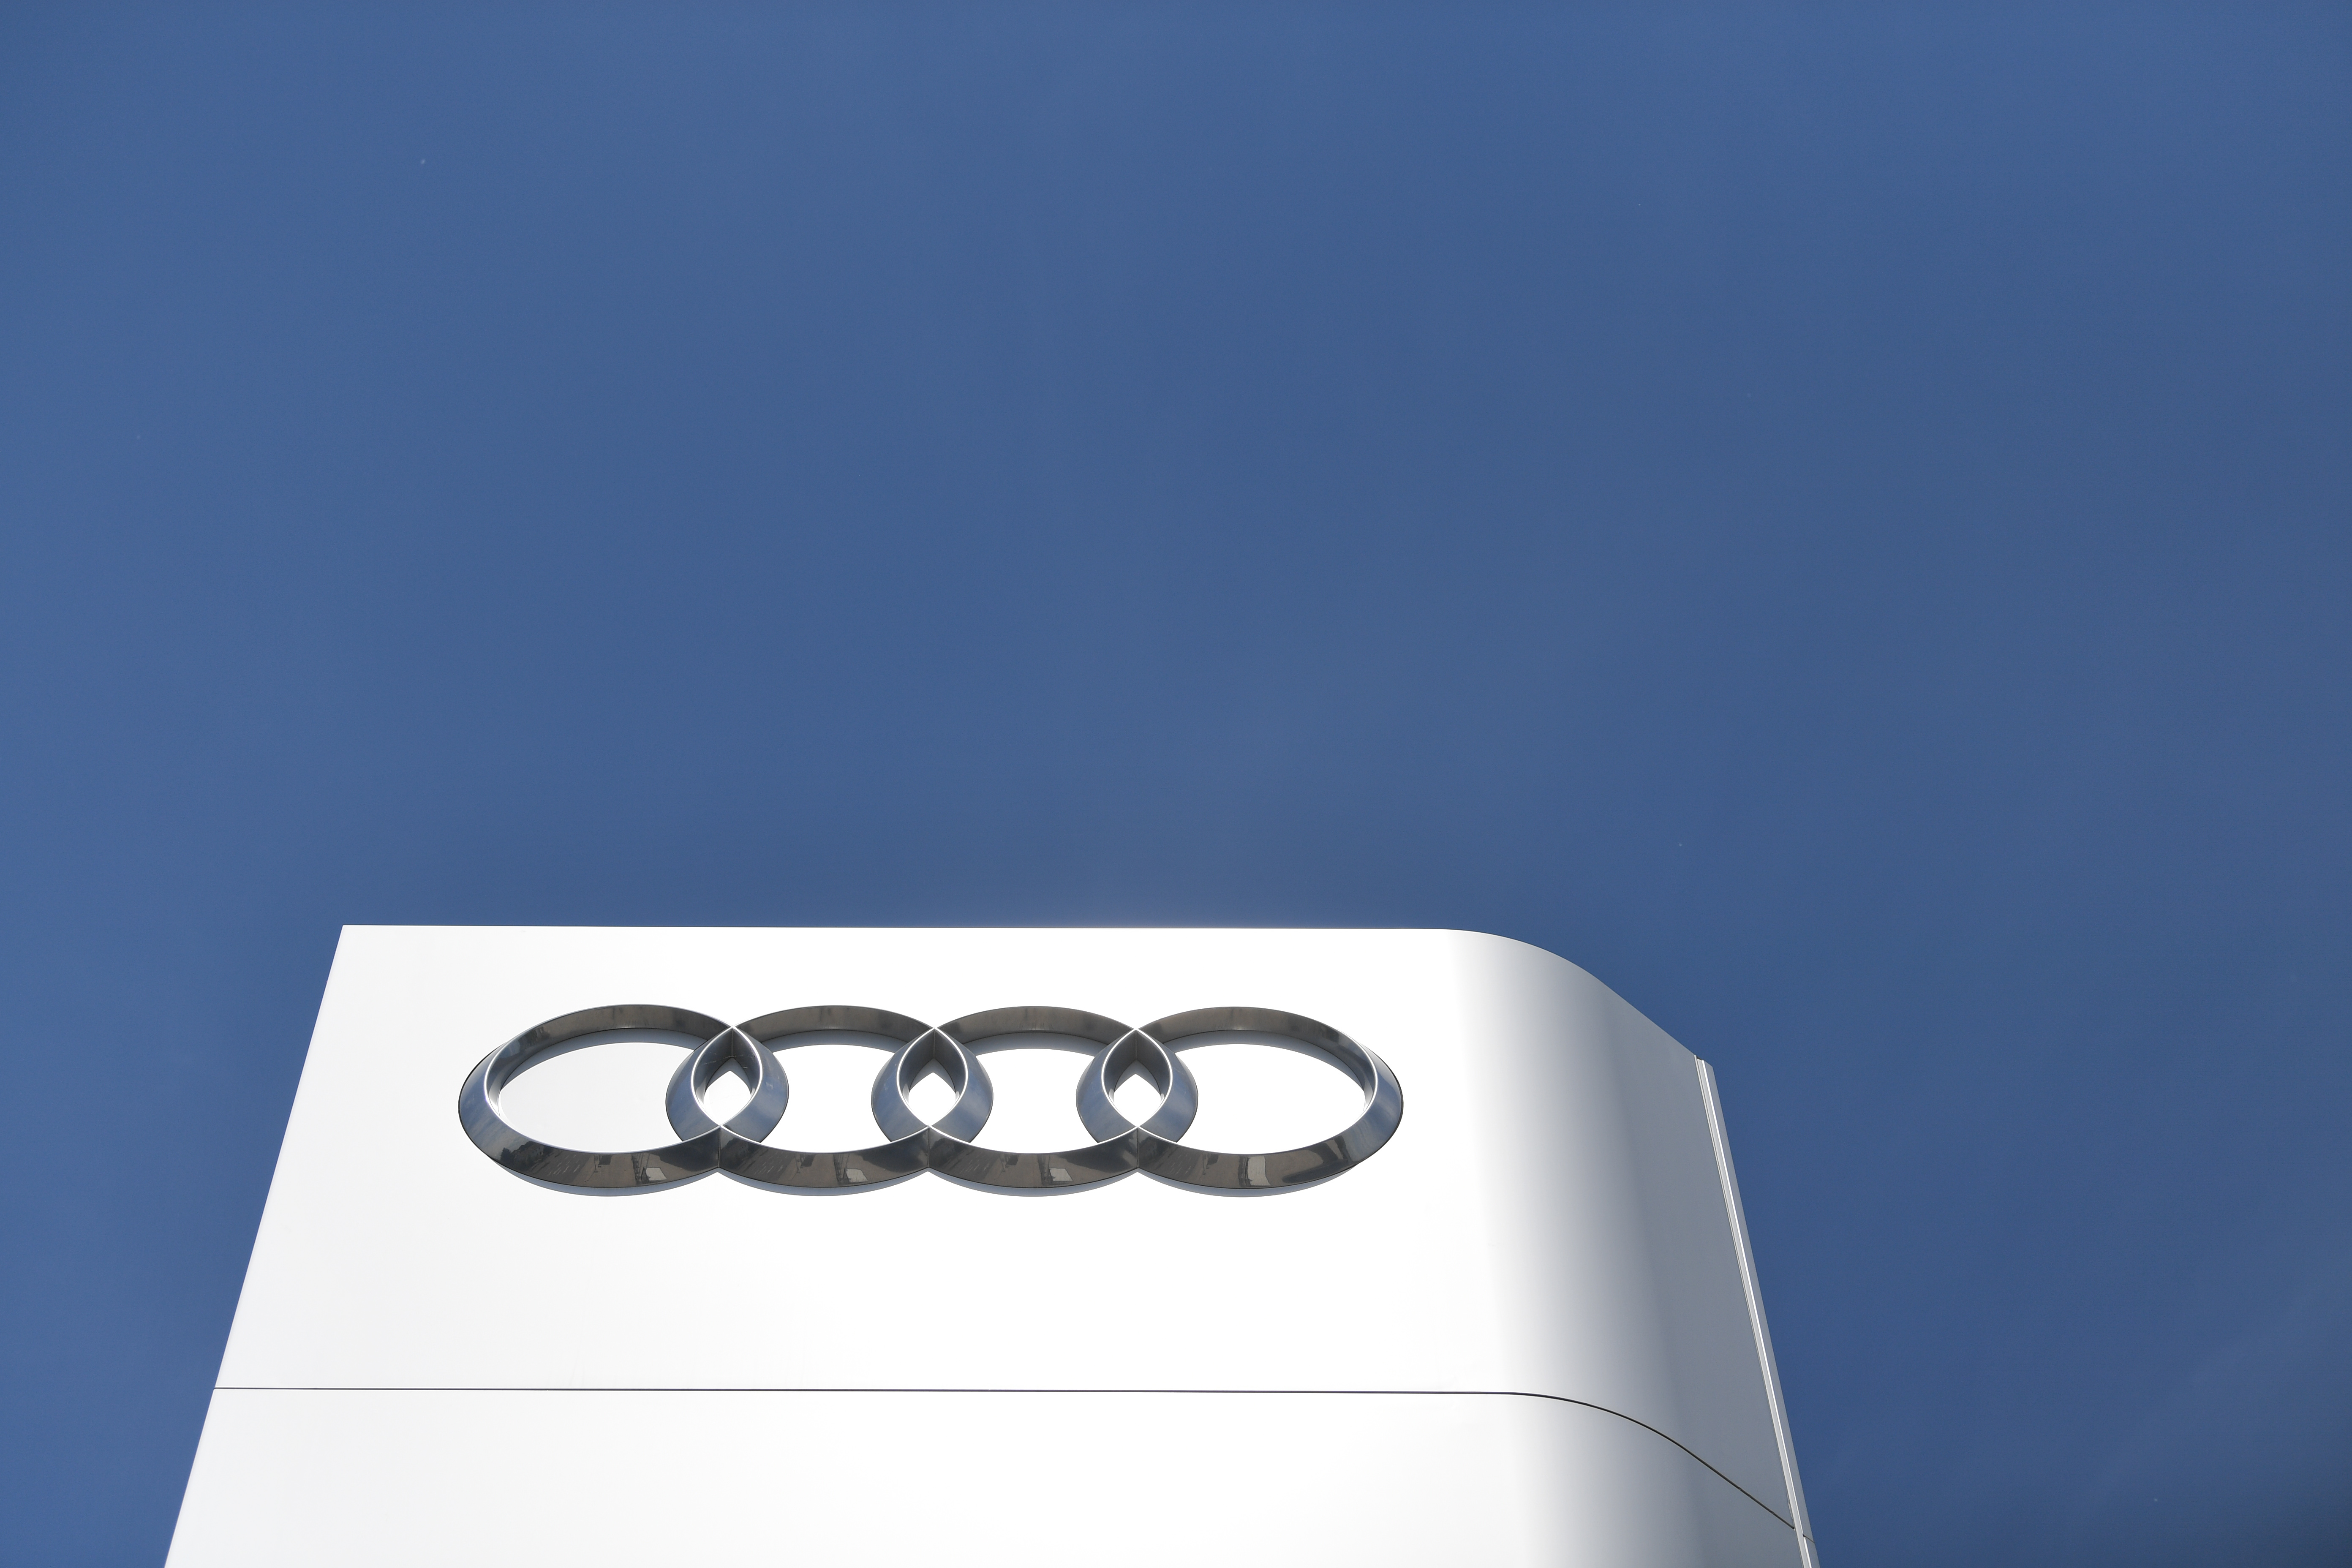 The company logo is seen at the headquarters of the German car manufacturer Audi, amid the spread of the coronavirus disease (COVID-19) in Ingolstadt, Germany, June 3, 2020. REUTERS/Andreas Gebert